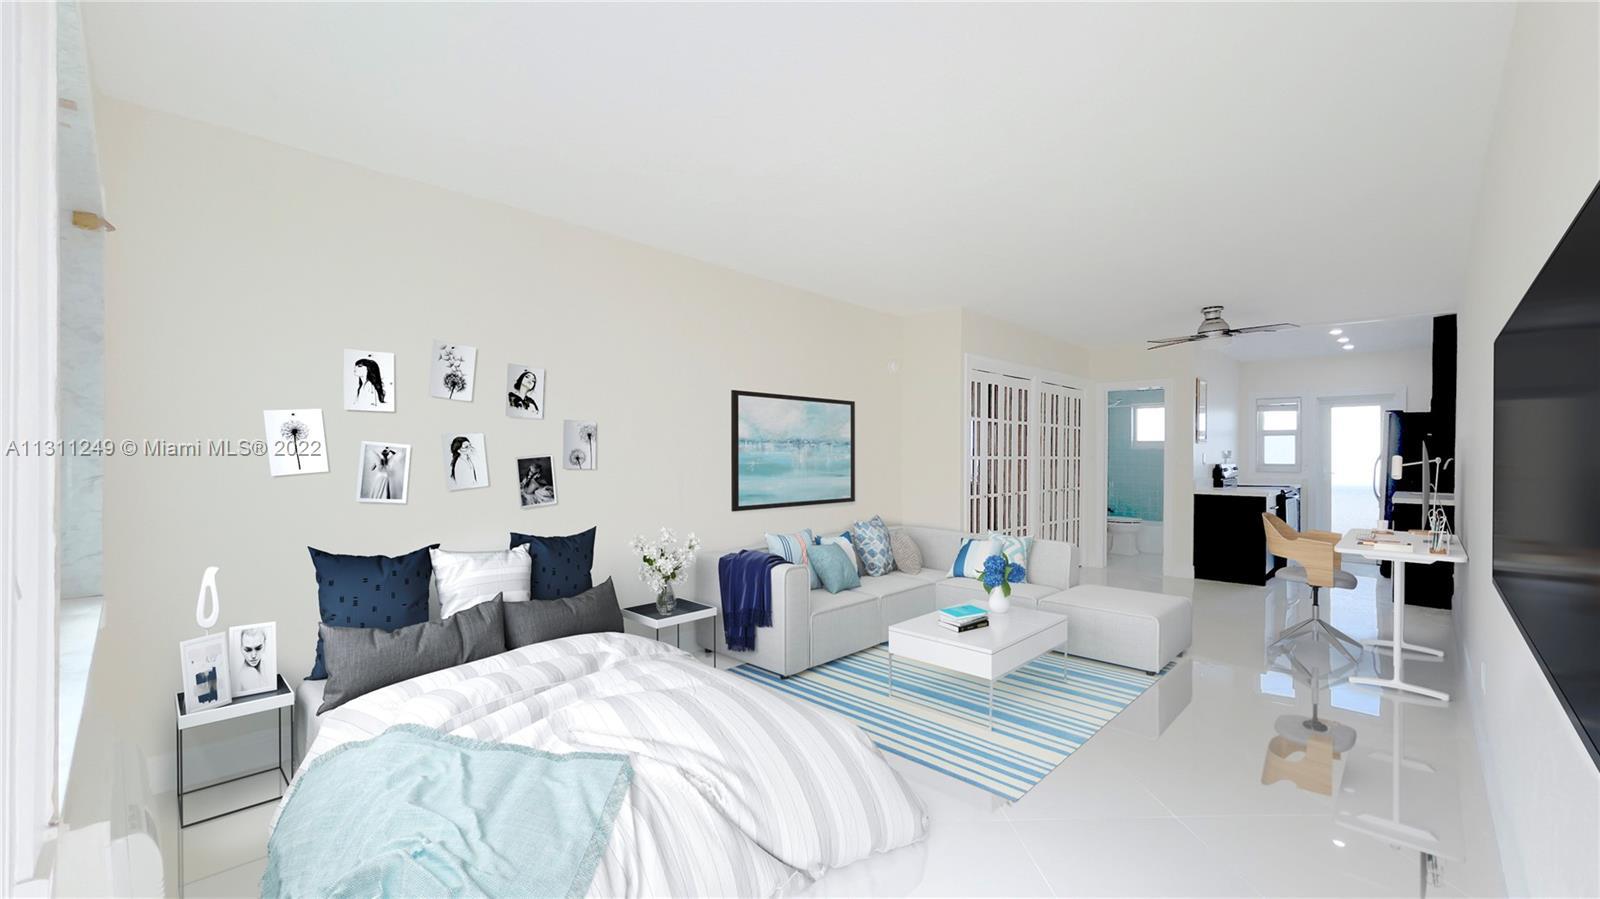 Location is Everything! South Beach Pied-A-Terre just off 5th Street on tree-lined Meridian Avenue. 